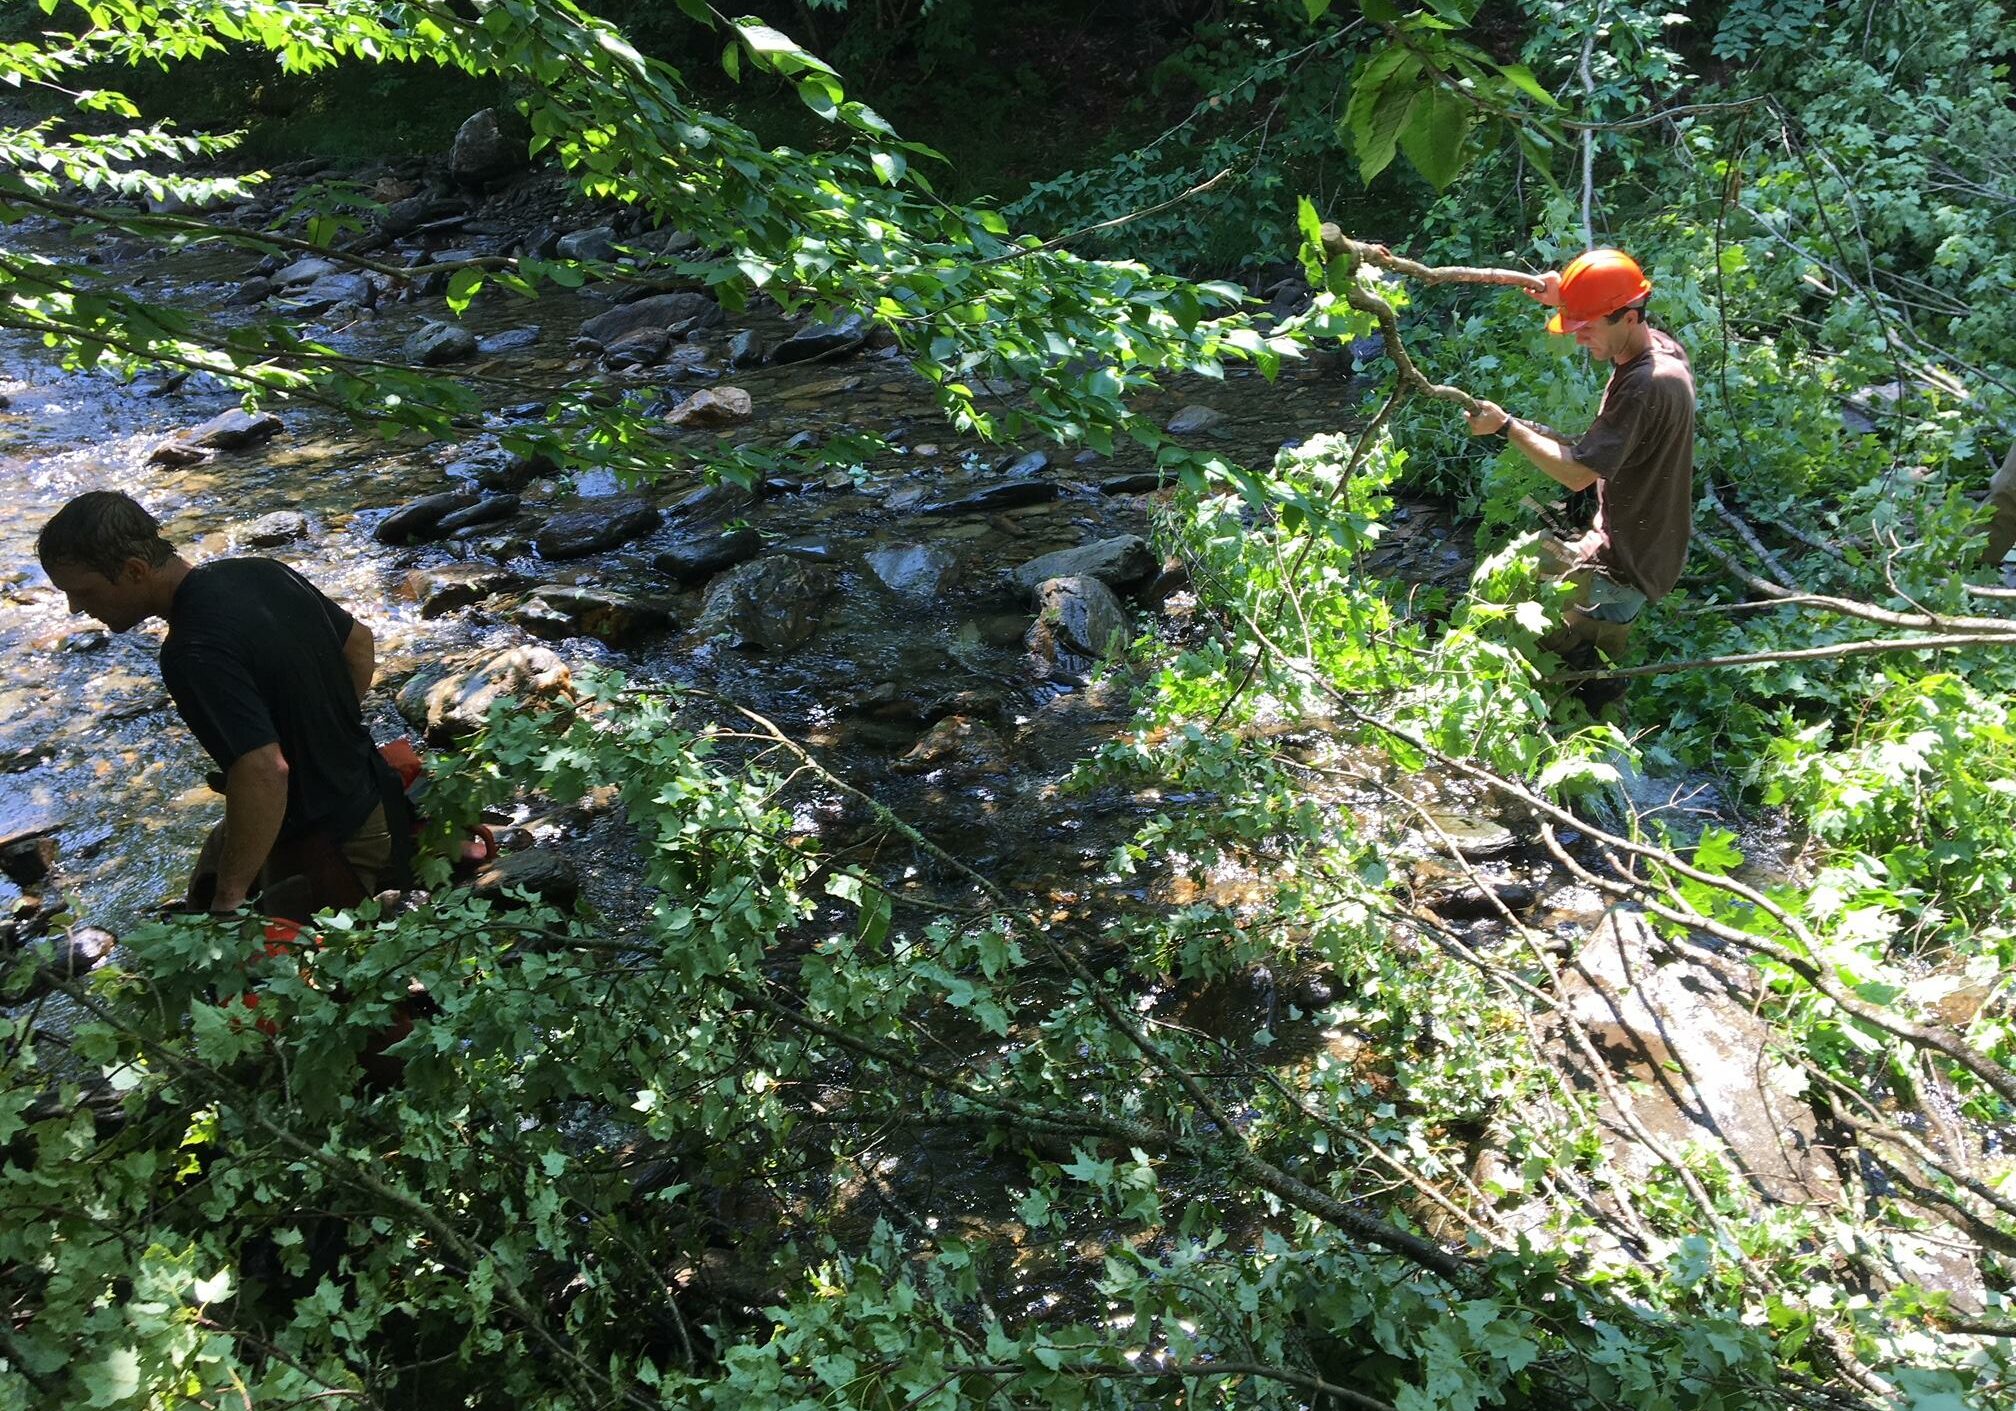 To improve habitat on Calavale Brook, first you have to drop some trees in the stream. Photo by John Dillon for VPR